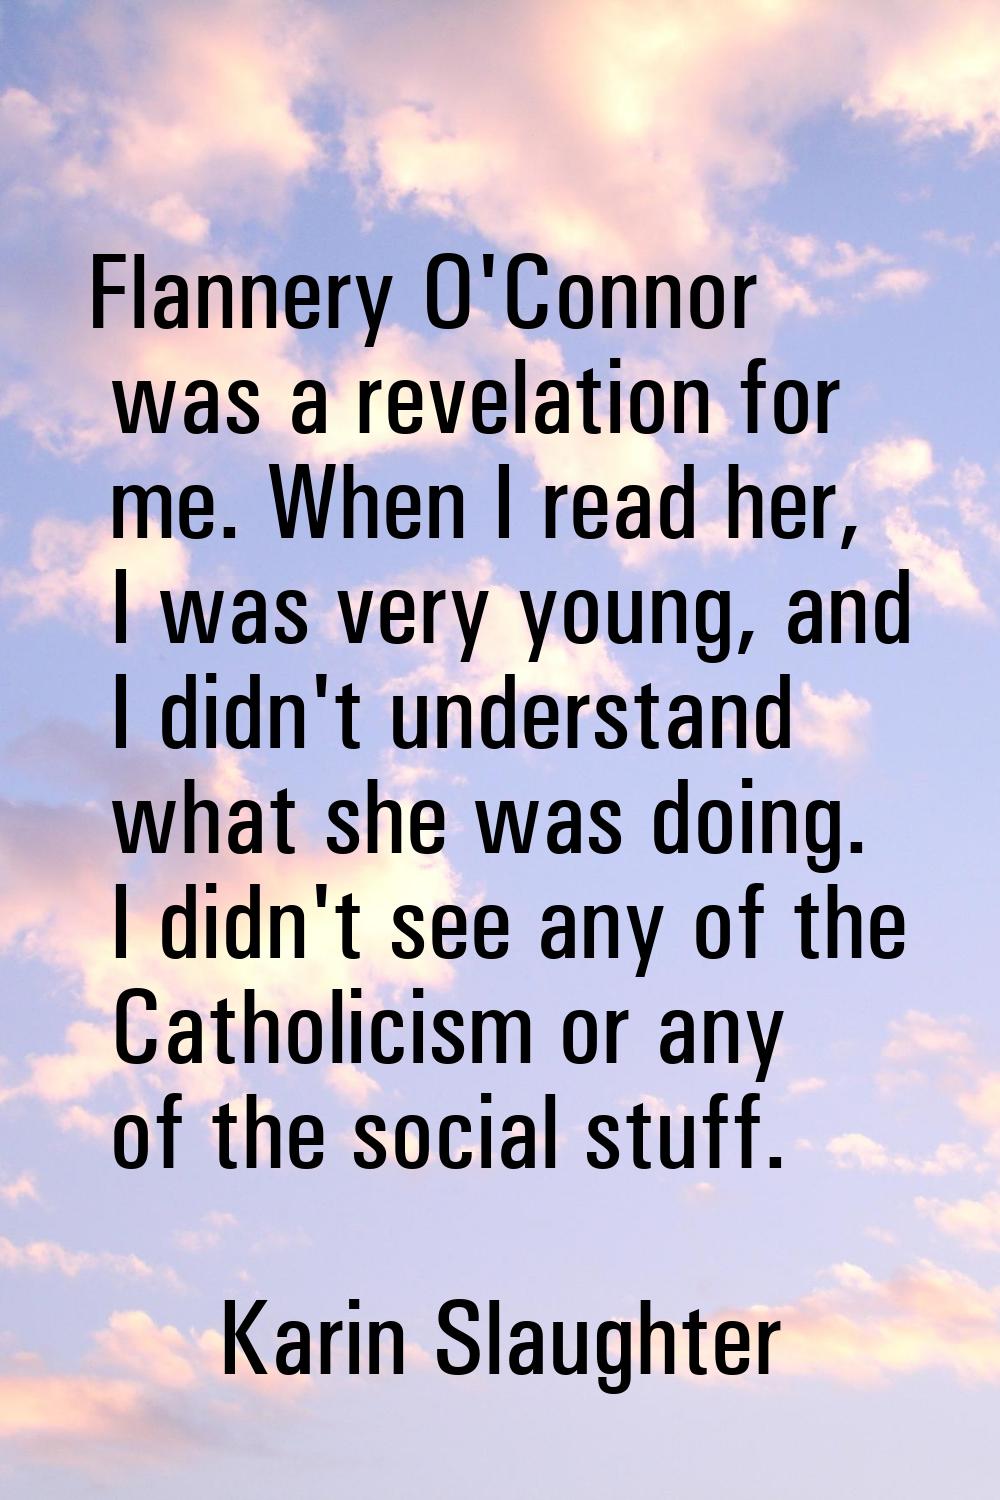 Flannery O'Connor was a revelation for me. When I read her, I was very young, and I didn't understa